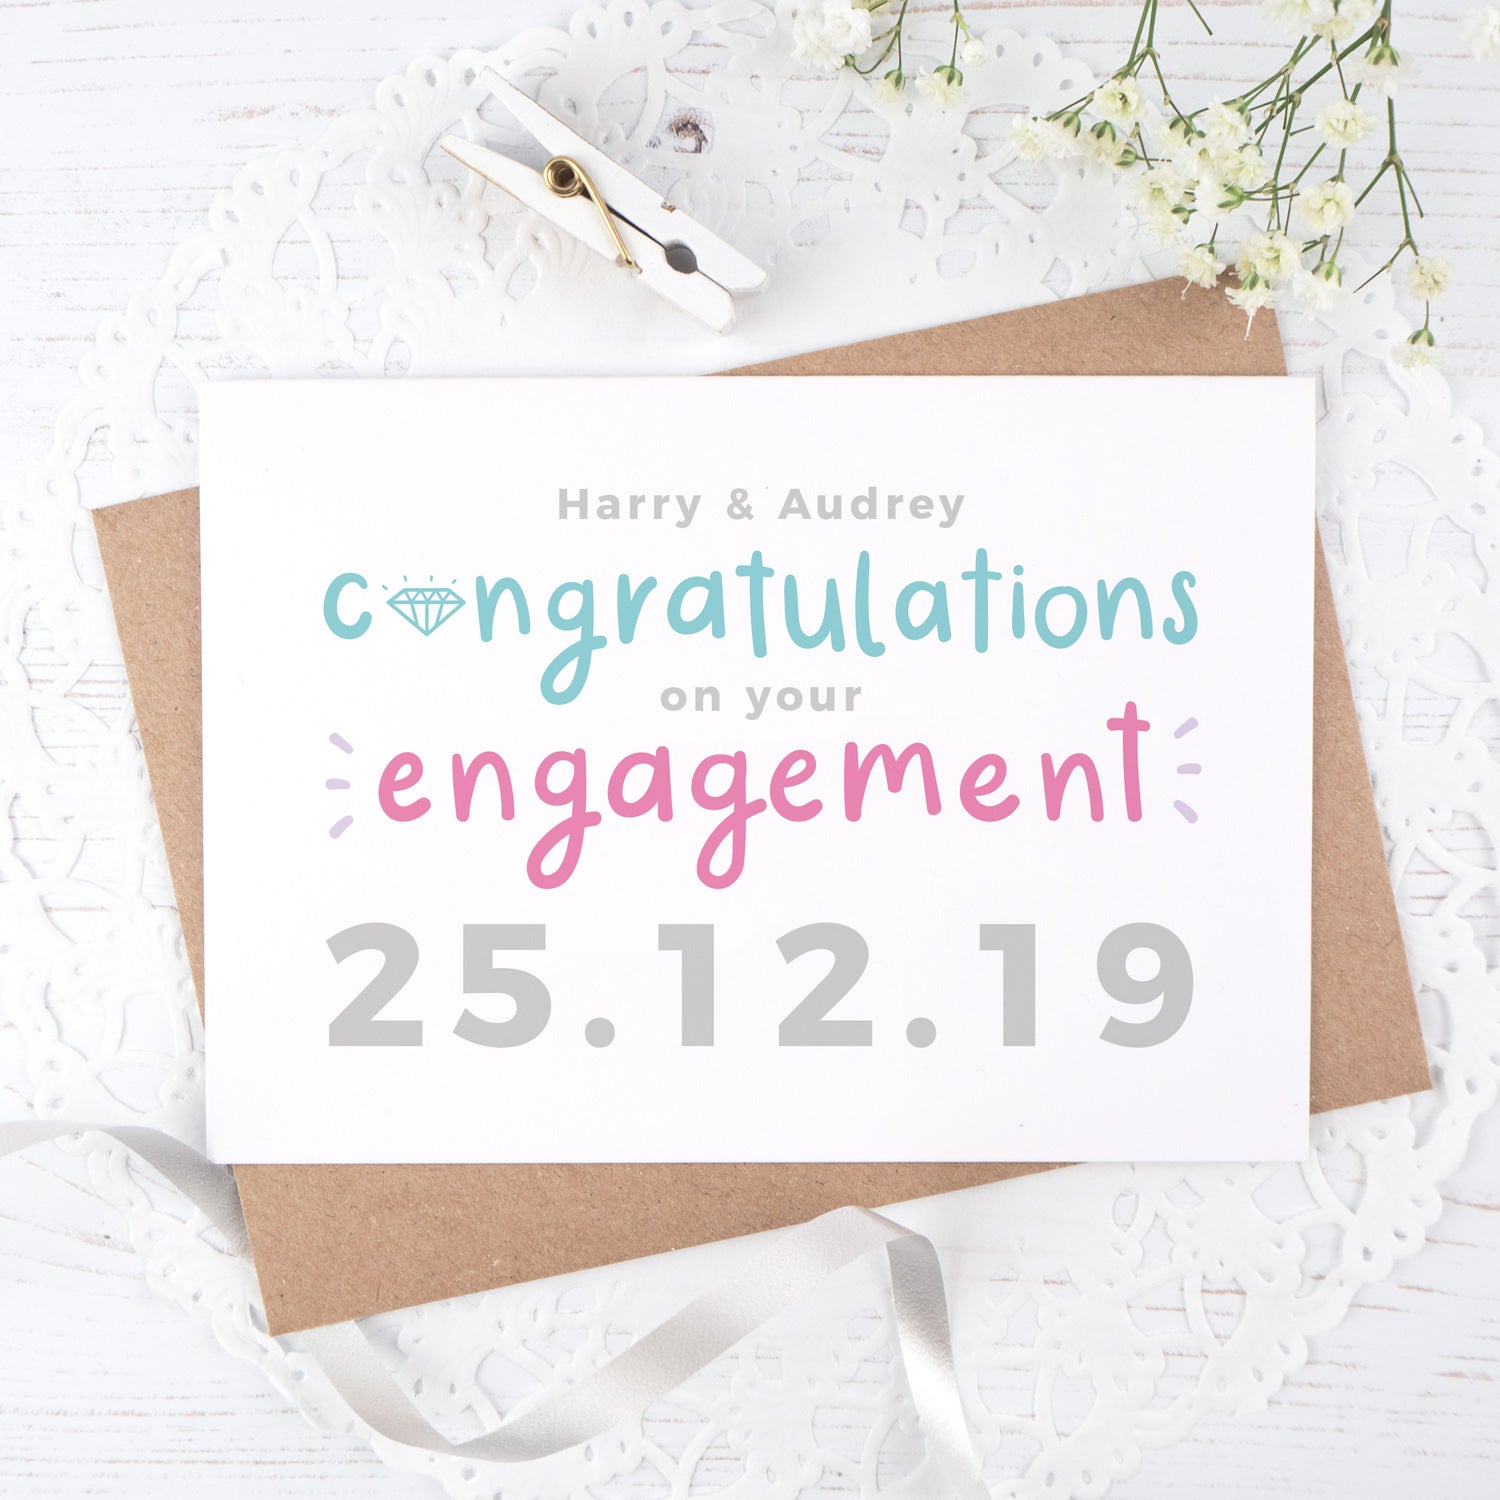 A personalised engagement card with room for the happy couples names and date the question was popped! This card has teal and pink text on a white background with a grey date.